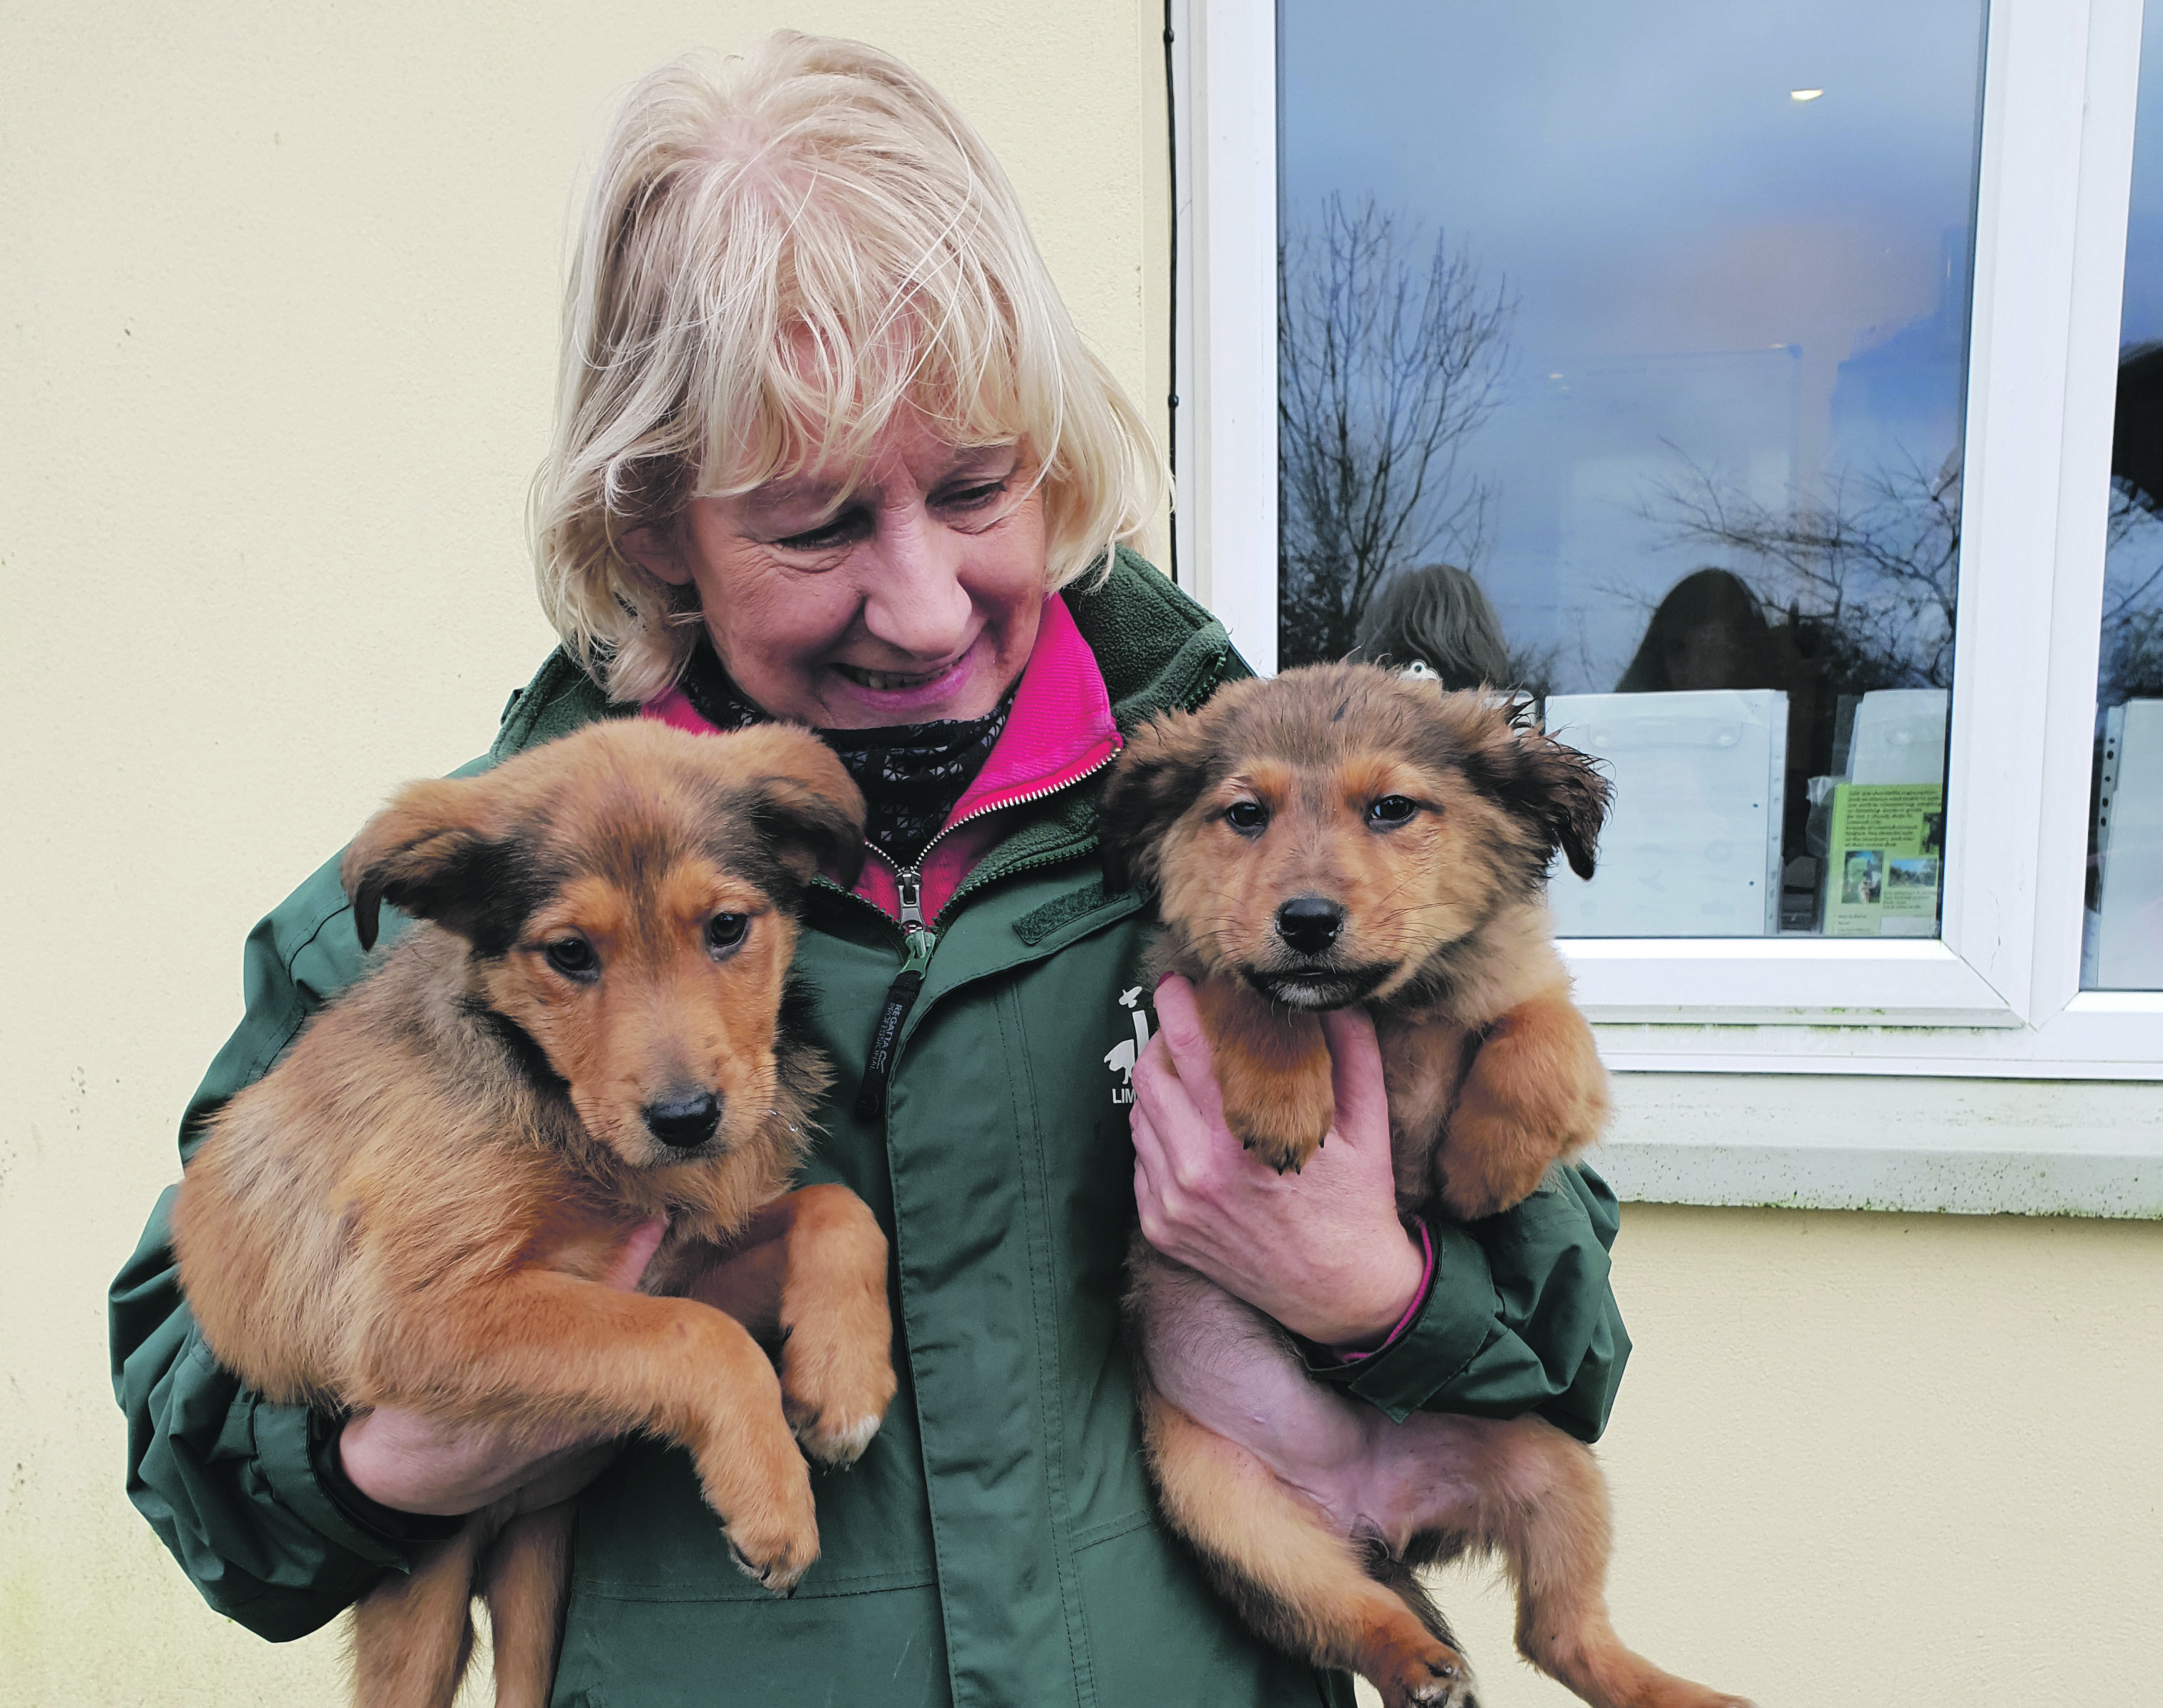 LAW Sanctuary Manager Marie O’Connor with Sugar and Spice at the Kilfinane Sanctuary.